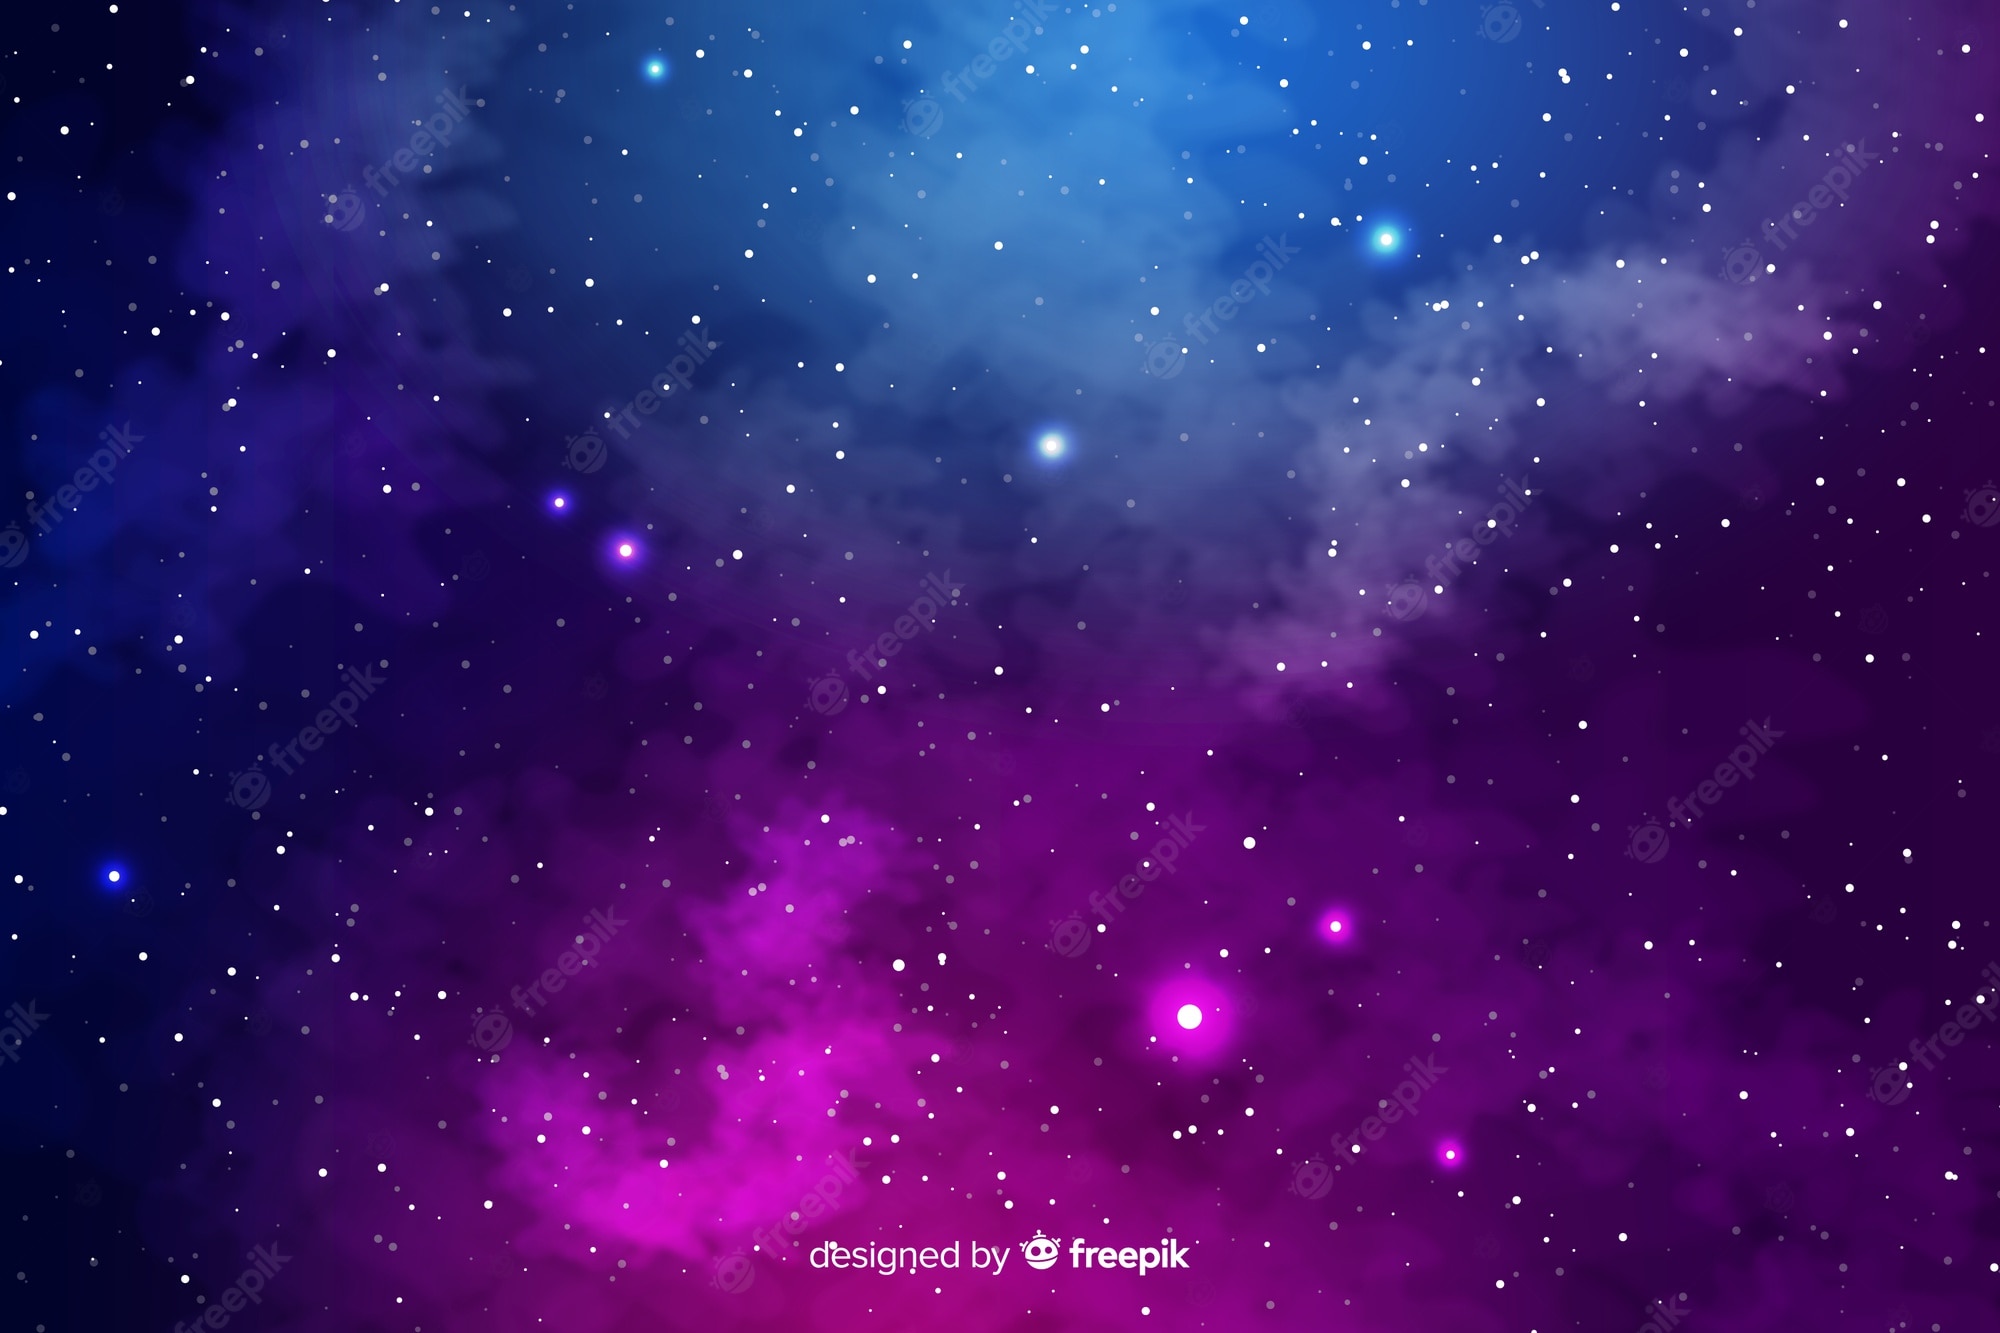 Space Image. Free Vectors, & PSD